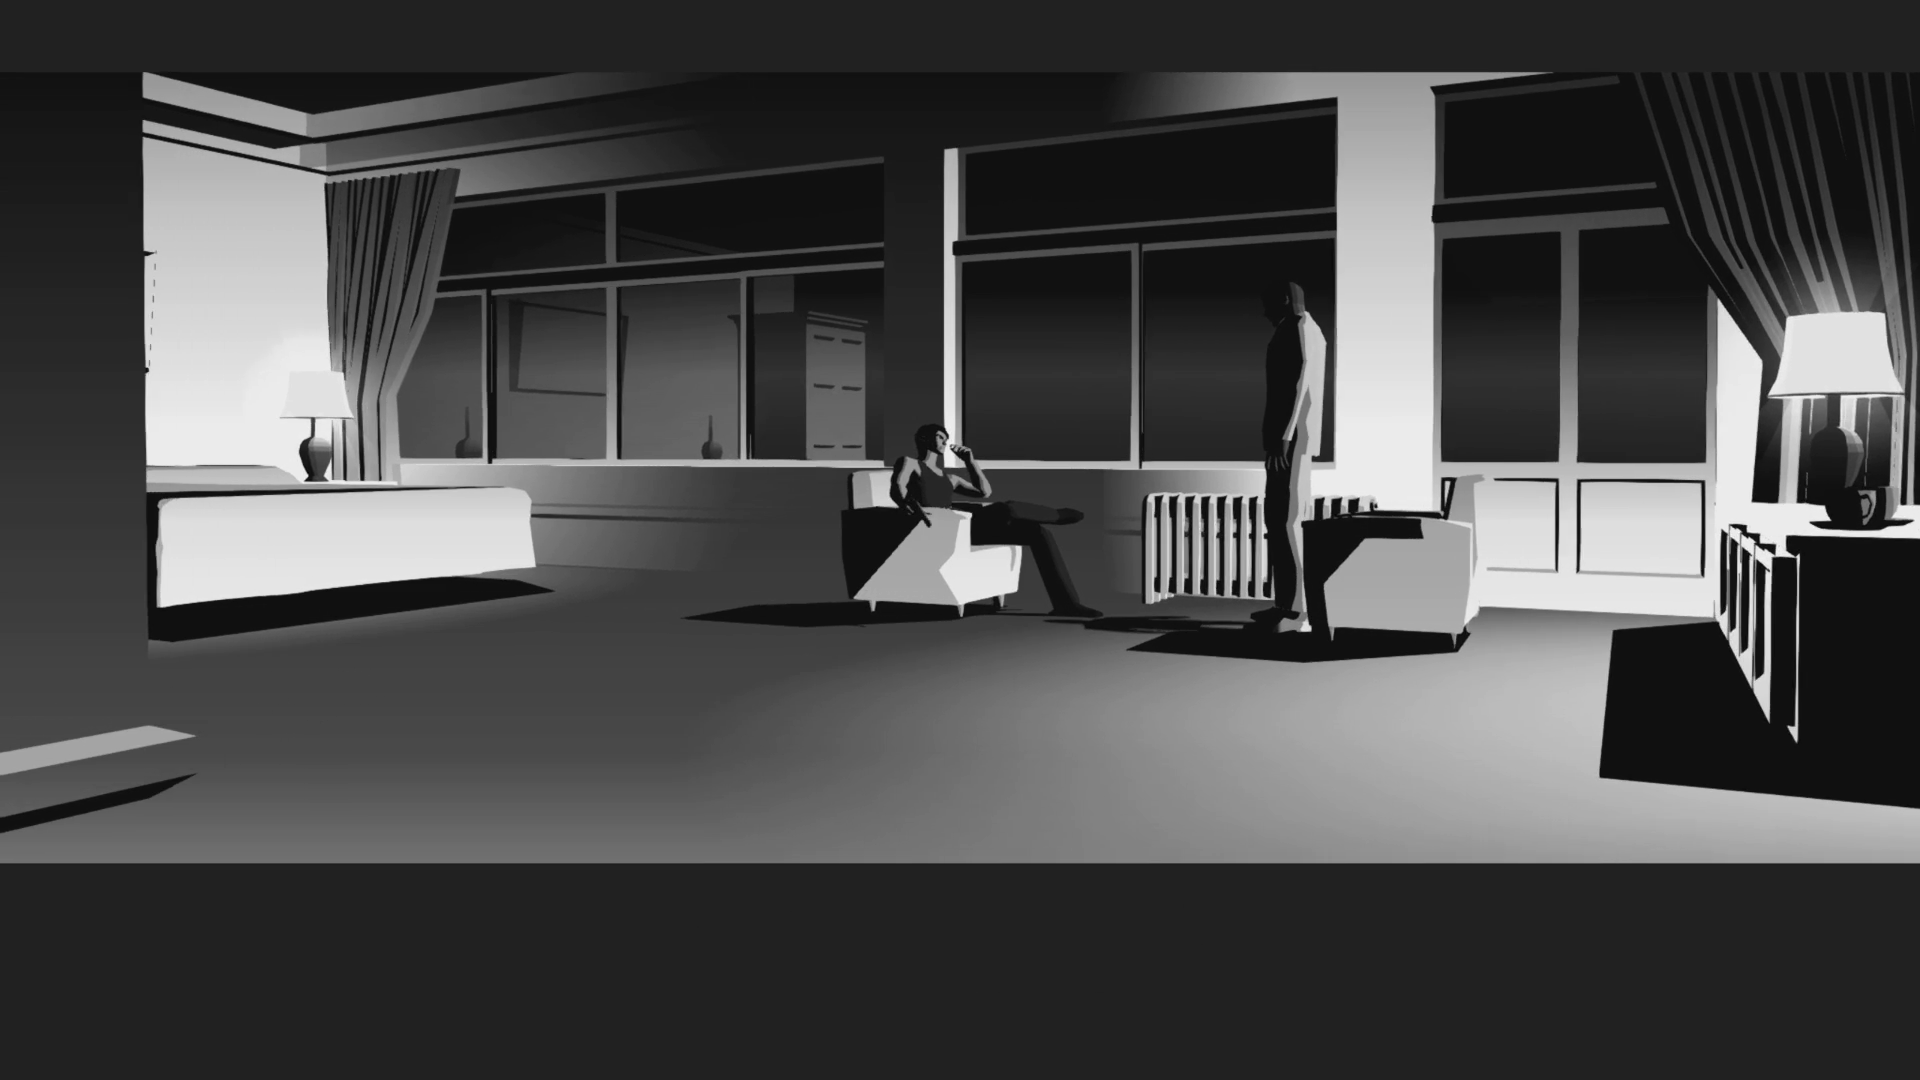 Screenshot from "Smile." Black-and-white, the wide shot shows a hotel room in the Union Hotel at night. Dan Smith sits in a chair on the left, a pistol in his right hand. Emir stands before the chair opposite Dan, staring down at him. Due to the angle and the lighting, Emir's face cannot be seen.